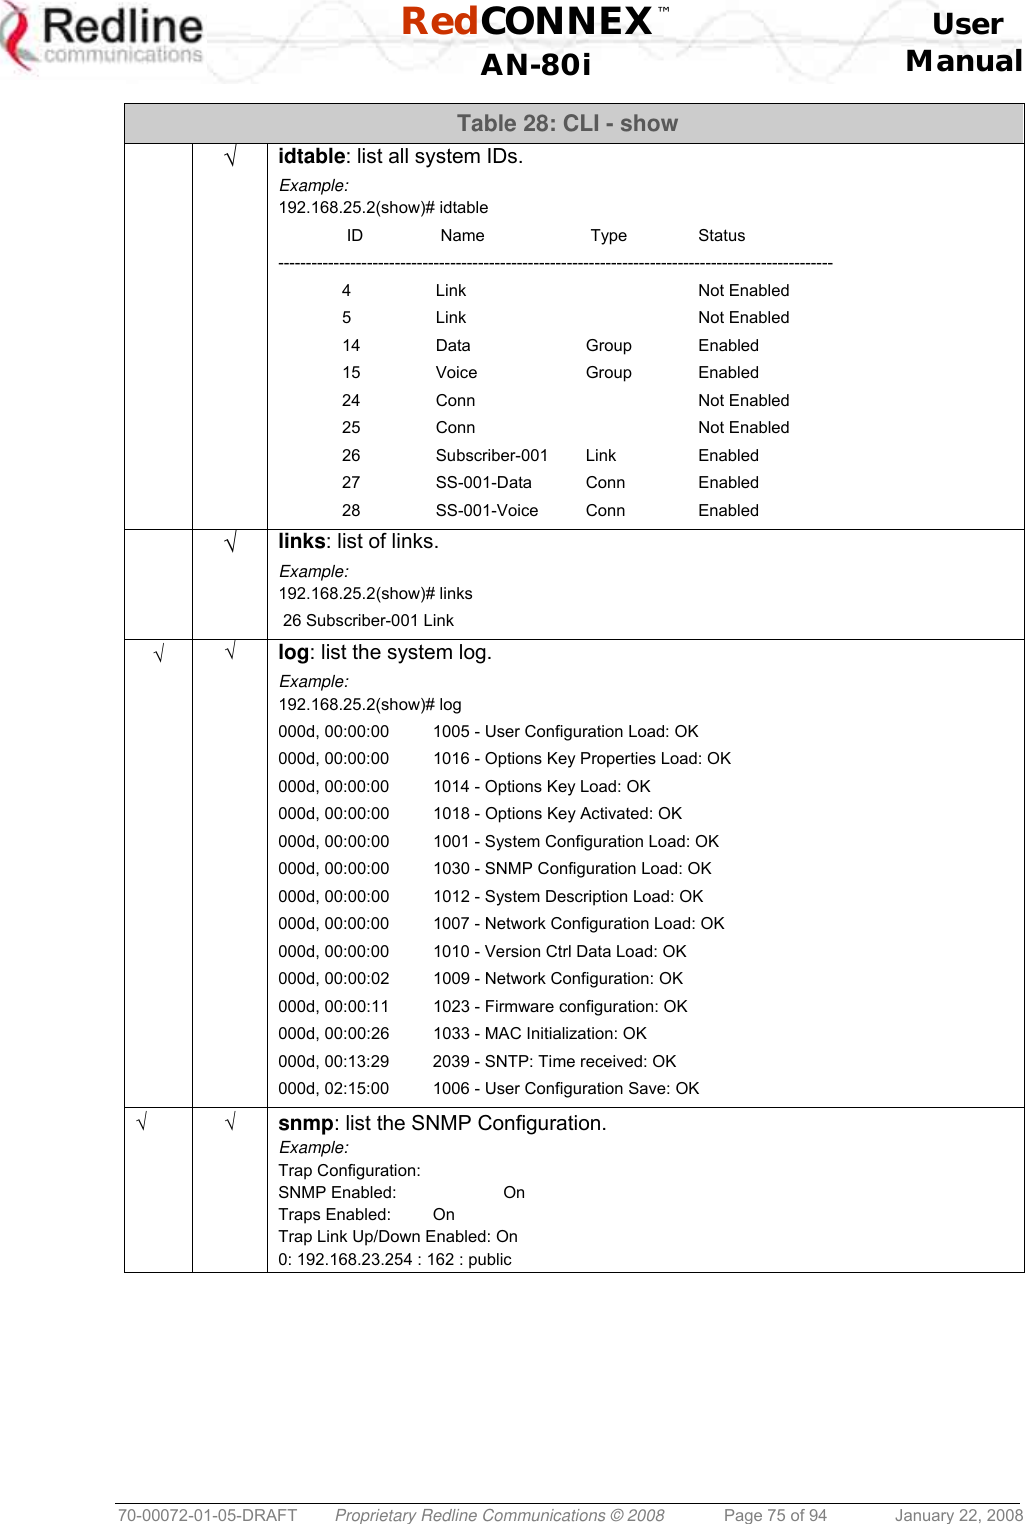  RedCONNEX™    User  AN-80i Manual  70-00072-01-05-DRAFT  Proprietary Redline Communications © 2008  Page 75 of 94  January 22, 2008 Table 28: CLI - show  √ idtable: list all system IDs. Example: 192.168.25.2(show)# idtable    ID   Name   Type  Status ----------------------------------------------------------------------------------------------------  4  Link    Not Enabled  5  Link    Not Enabled  14  Data  Group  Enabled  15  Voice  Group  Enabled  24  Conn    Not Enabled  25  Conn    Not Enabled  26  Subscriber-001 Link  Enabled  27  SS-001-Data Conn  Enabled  28  SS-001-Voice Conn  Enabled  √ links: list of links. Example: 192.168.25.2(show)# links  26 Subscriber-001 Link √ √ log: list the system log. Example: 192.168.25.2(show)# log 000d, 00:00:00   1005 - User Configuration Load: OK 000d, 00:00:00   1016 - Options Key Properties Load: OK 000d, 00:00:00   1014 - Options Key Load: OK 000d, 00:00:00   1018 - Options Key Activated: OK 000d, 00:00:00   1001 - System Configuration Load: OK 000d, 00:00:00   1030 - SNMP Configuration Load: OK 000d, 00:00:00   1012 - System Description Load: OK 000d, 00:00:00   1007 - Network Configuration Load: OK 000d, 00:00:00   1010 - Version Ctrl Data Load: OK 000d, 00:00:02   1009 - Network Configuration: OK 000d, 00:00:11   1023 - Firmware configuration: OK 000d, 00:00:26   1033 - MAC Initialization: OK 000d, 00:13:29   2039 - SNTP: Time received: OK 000d, 02:15:00   1006 - User Configuration Save: OK √ √ snmp: list the SNMP Configuration. Example: Trap Configuration: SNMP Enabled:    On Traps Enabled:   On Trap Link Up/Down Enabled: On 0: 192.168.23.254 : 162 : public 